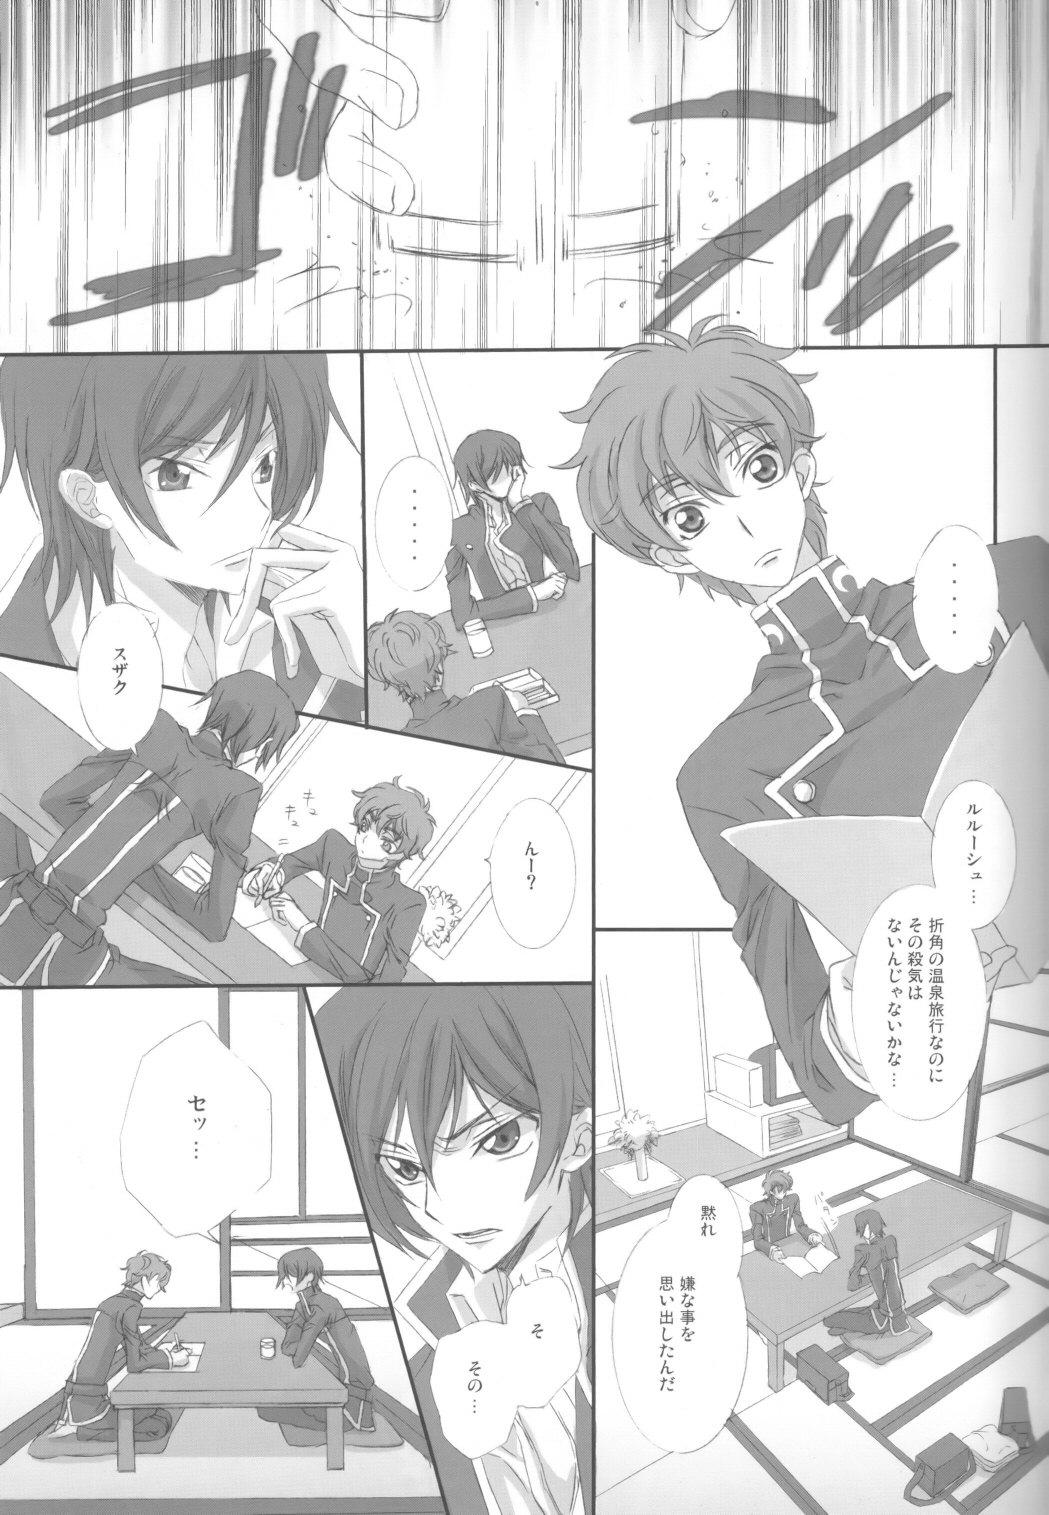 Perfect on・non・om - Code geass Comedor - Page 6